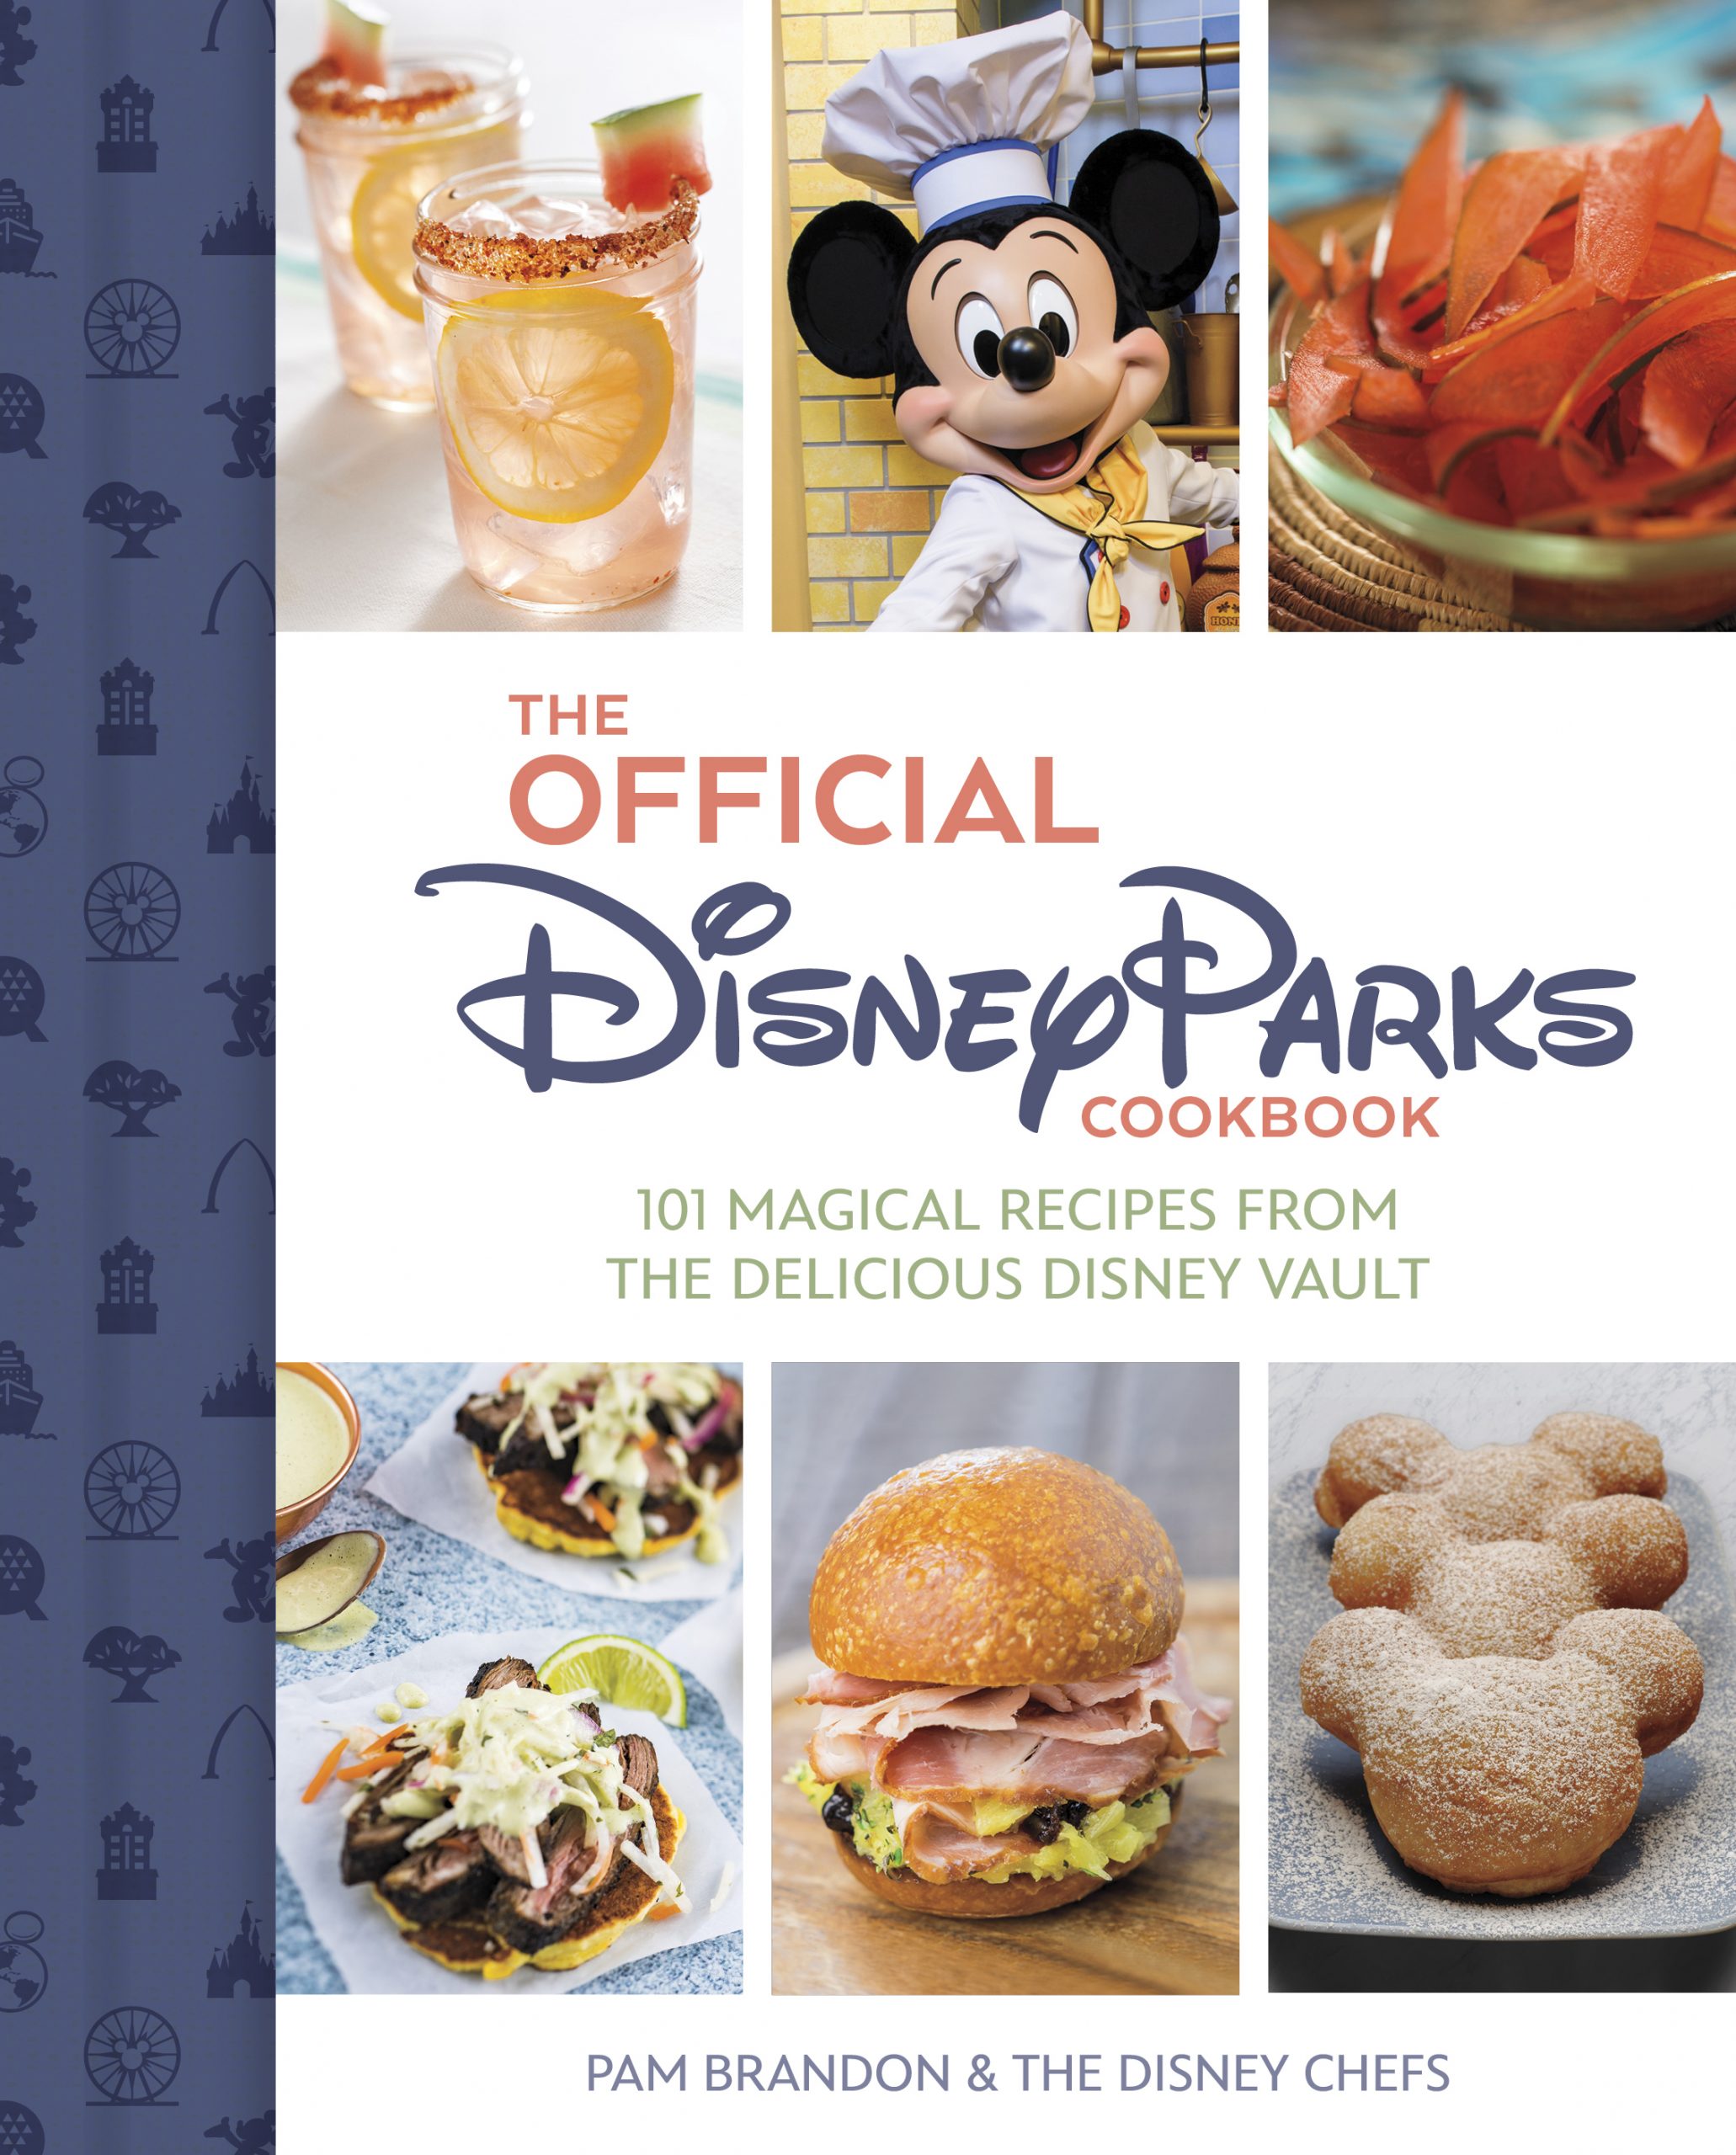 The Official Disney Parks Cookbook 101 Magical Recipes from the